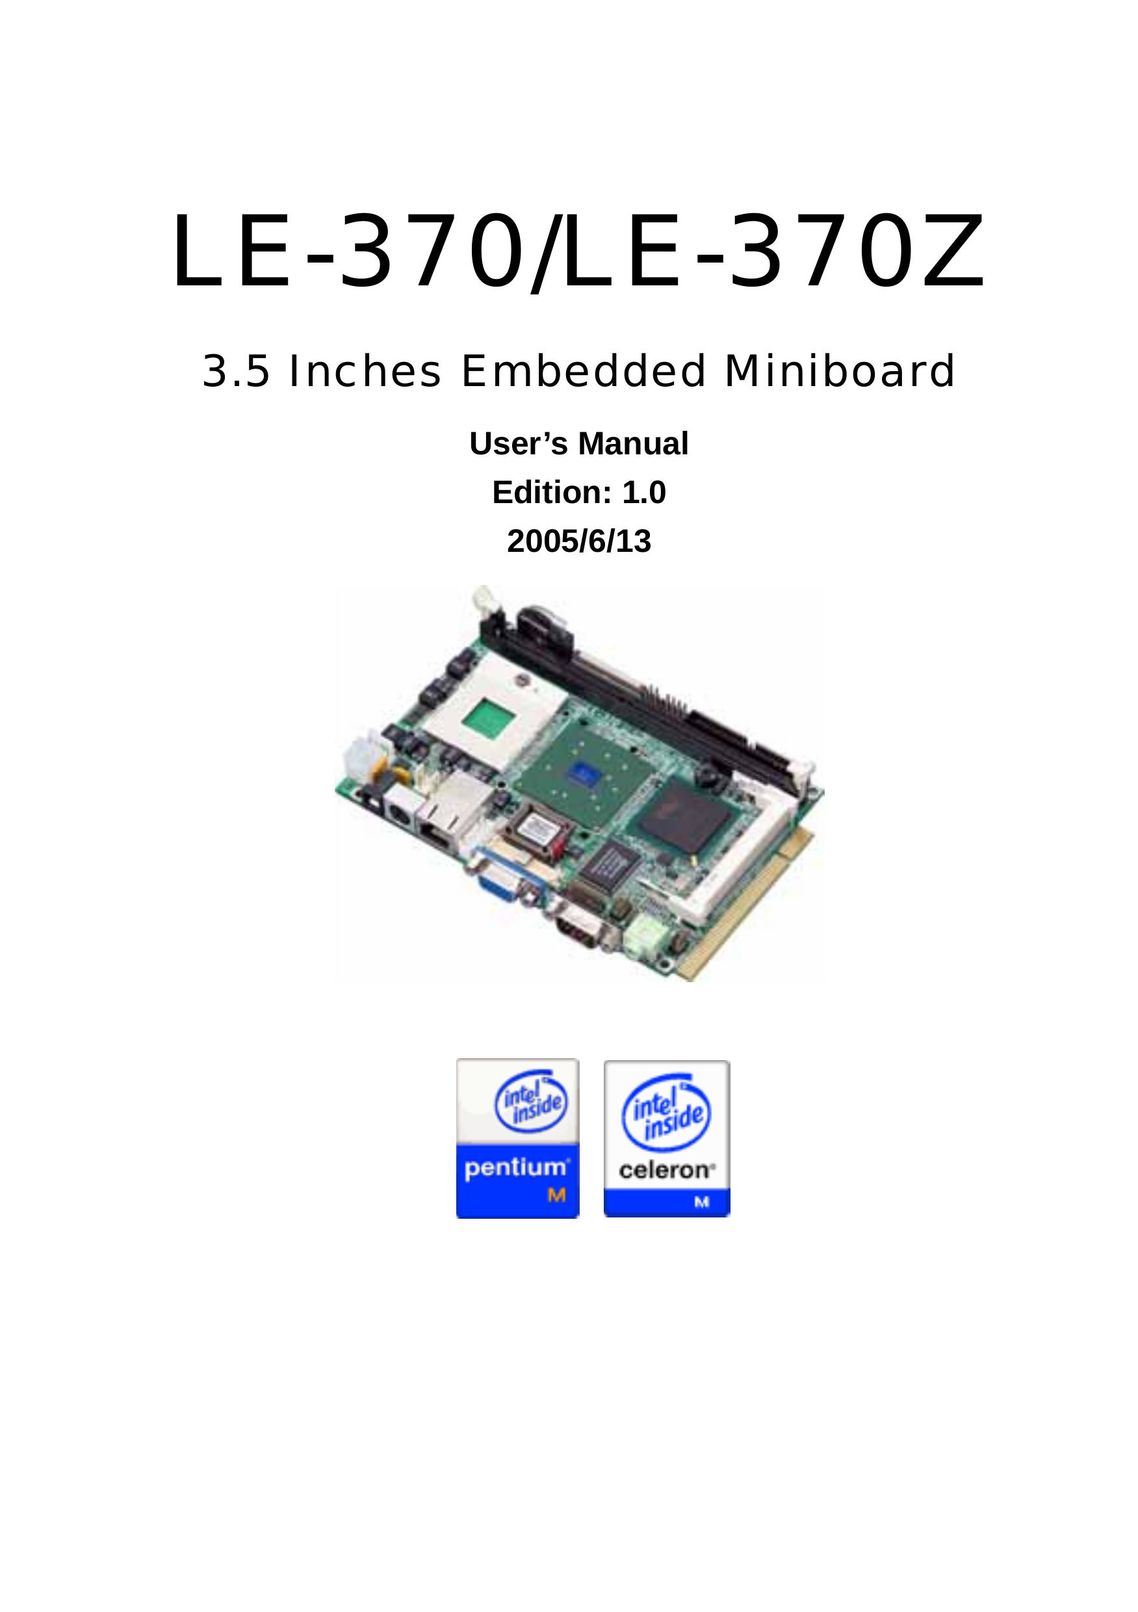 Intel 3.5 Inches Embedded Miniboard Computer Hardware User Manual